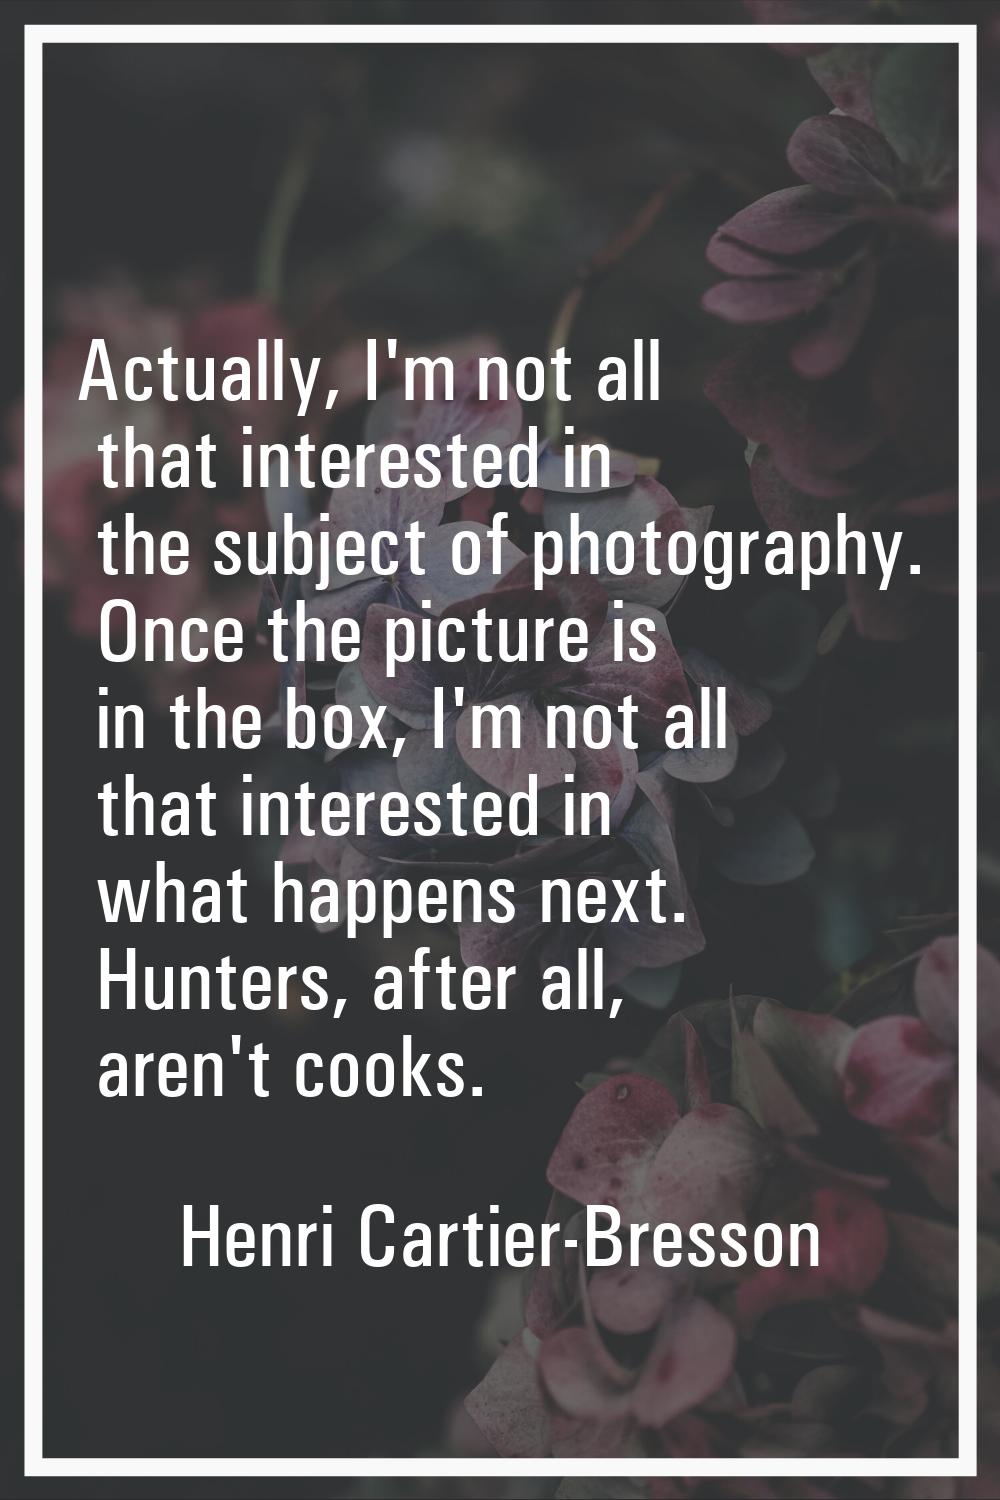 Actually, I'm not all that interested in the subject of photography. Once the picture is in the box